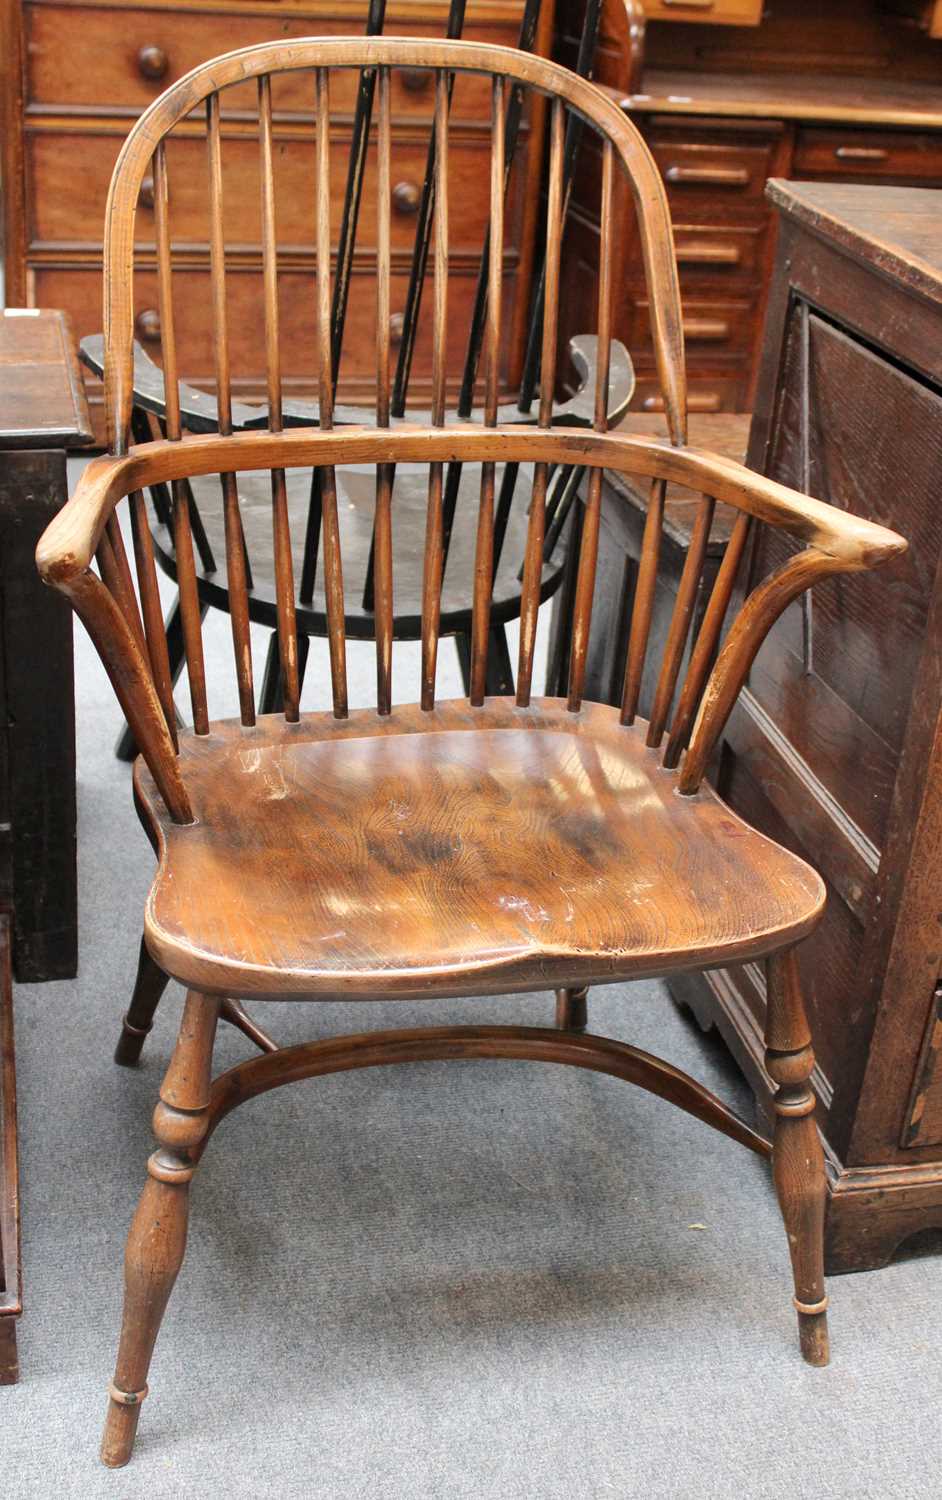 An Early 20th Century Elm Windsor Chair, with crinoline stretcher and dished seat